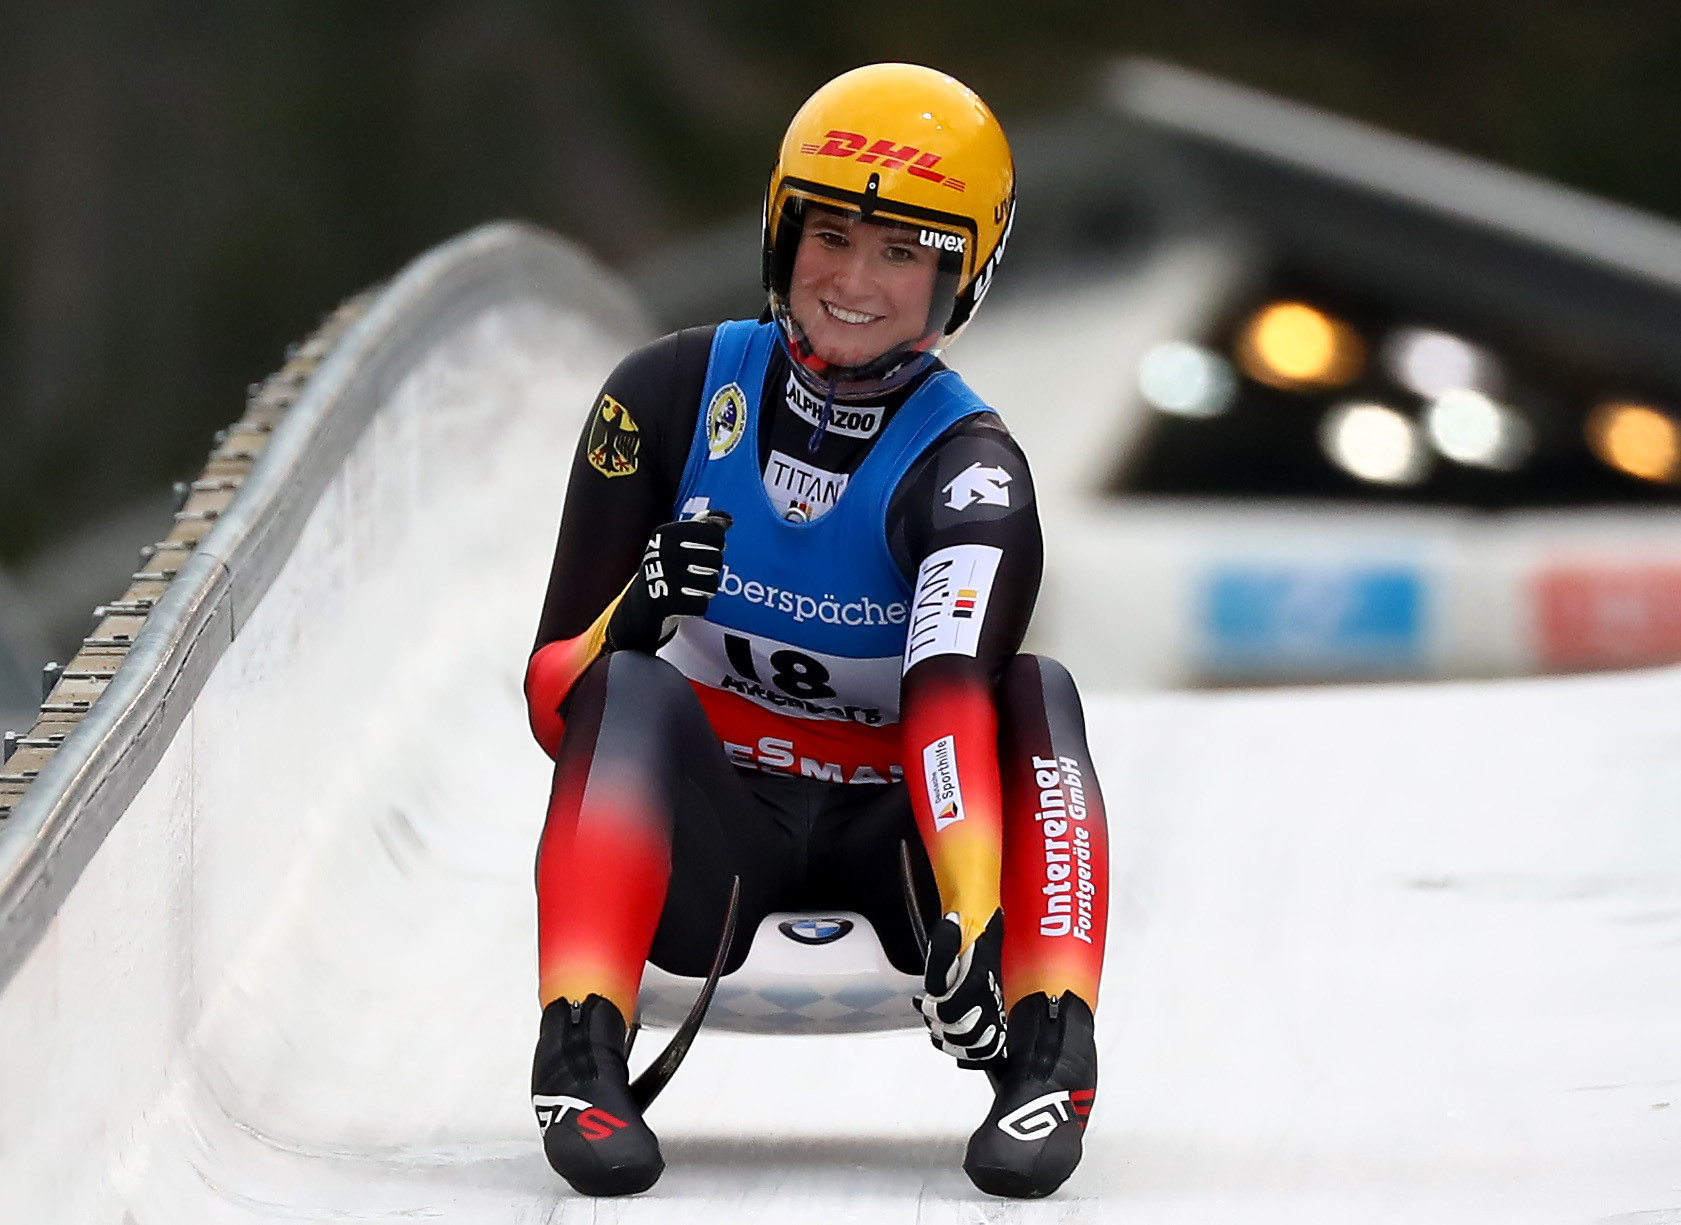 Geisenberger earns 50th Luge World Cup victory in Oberhof